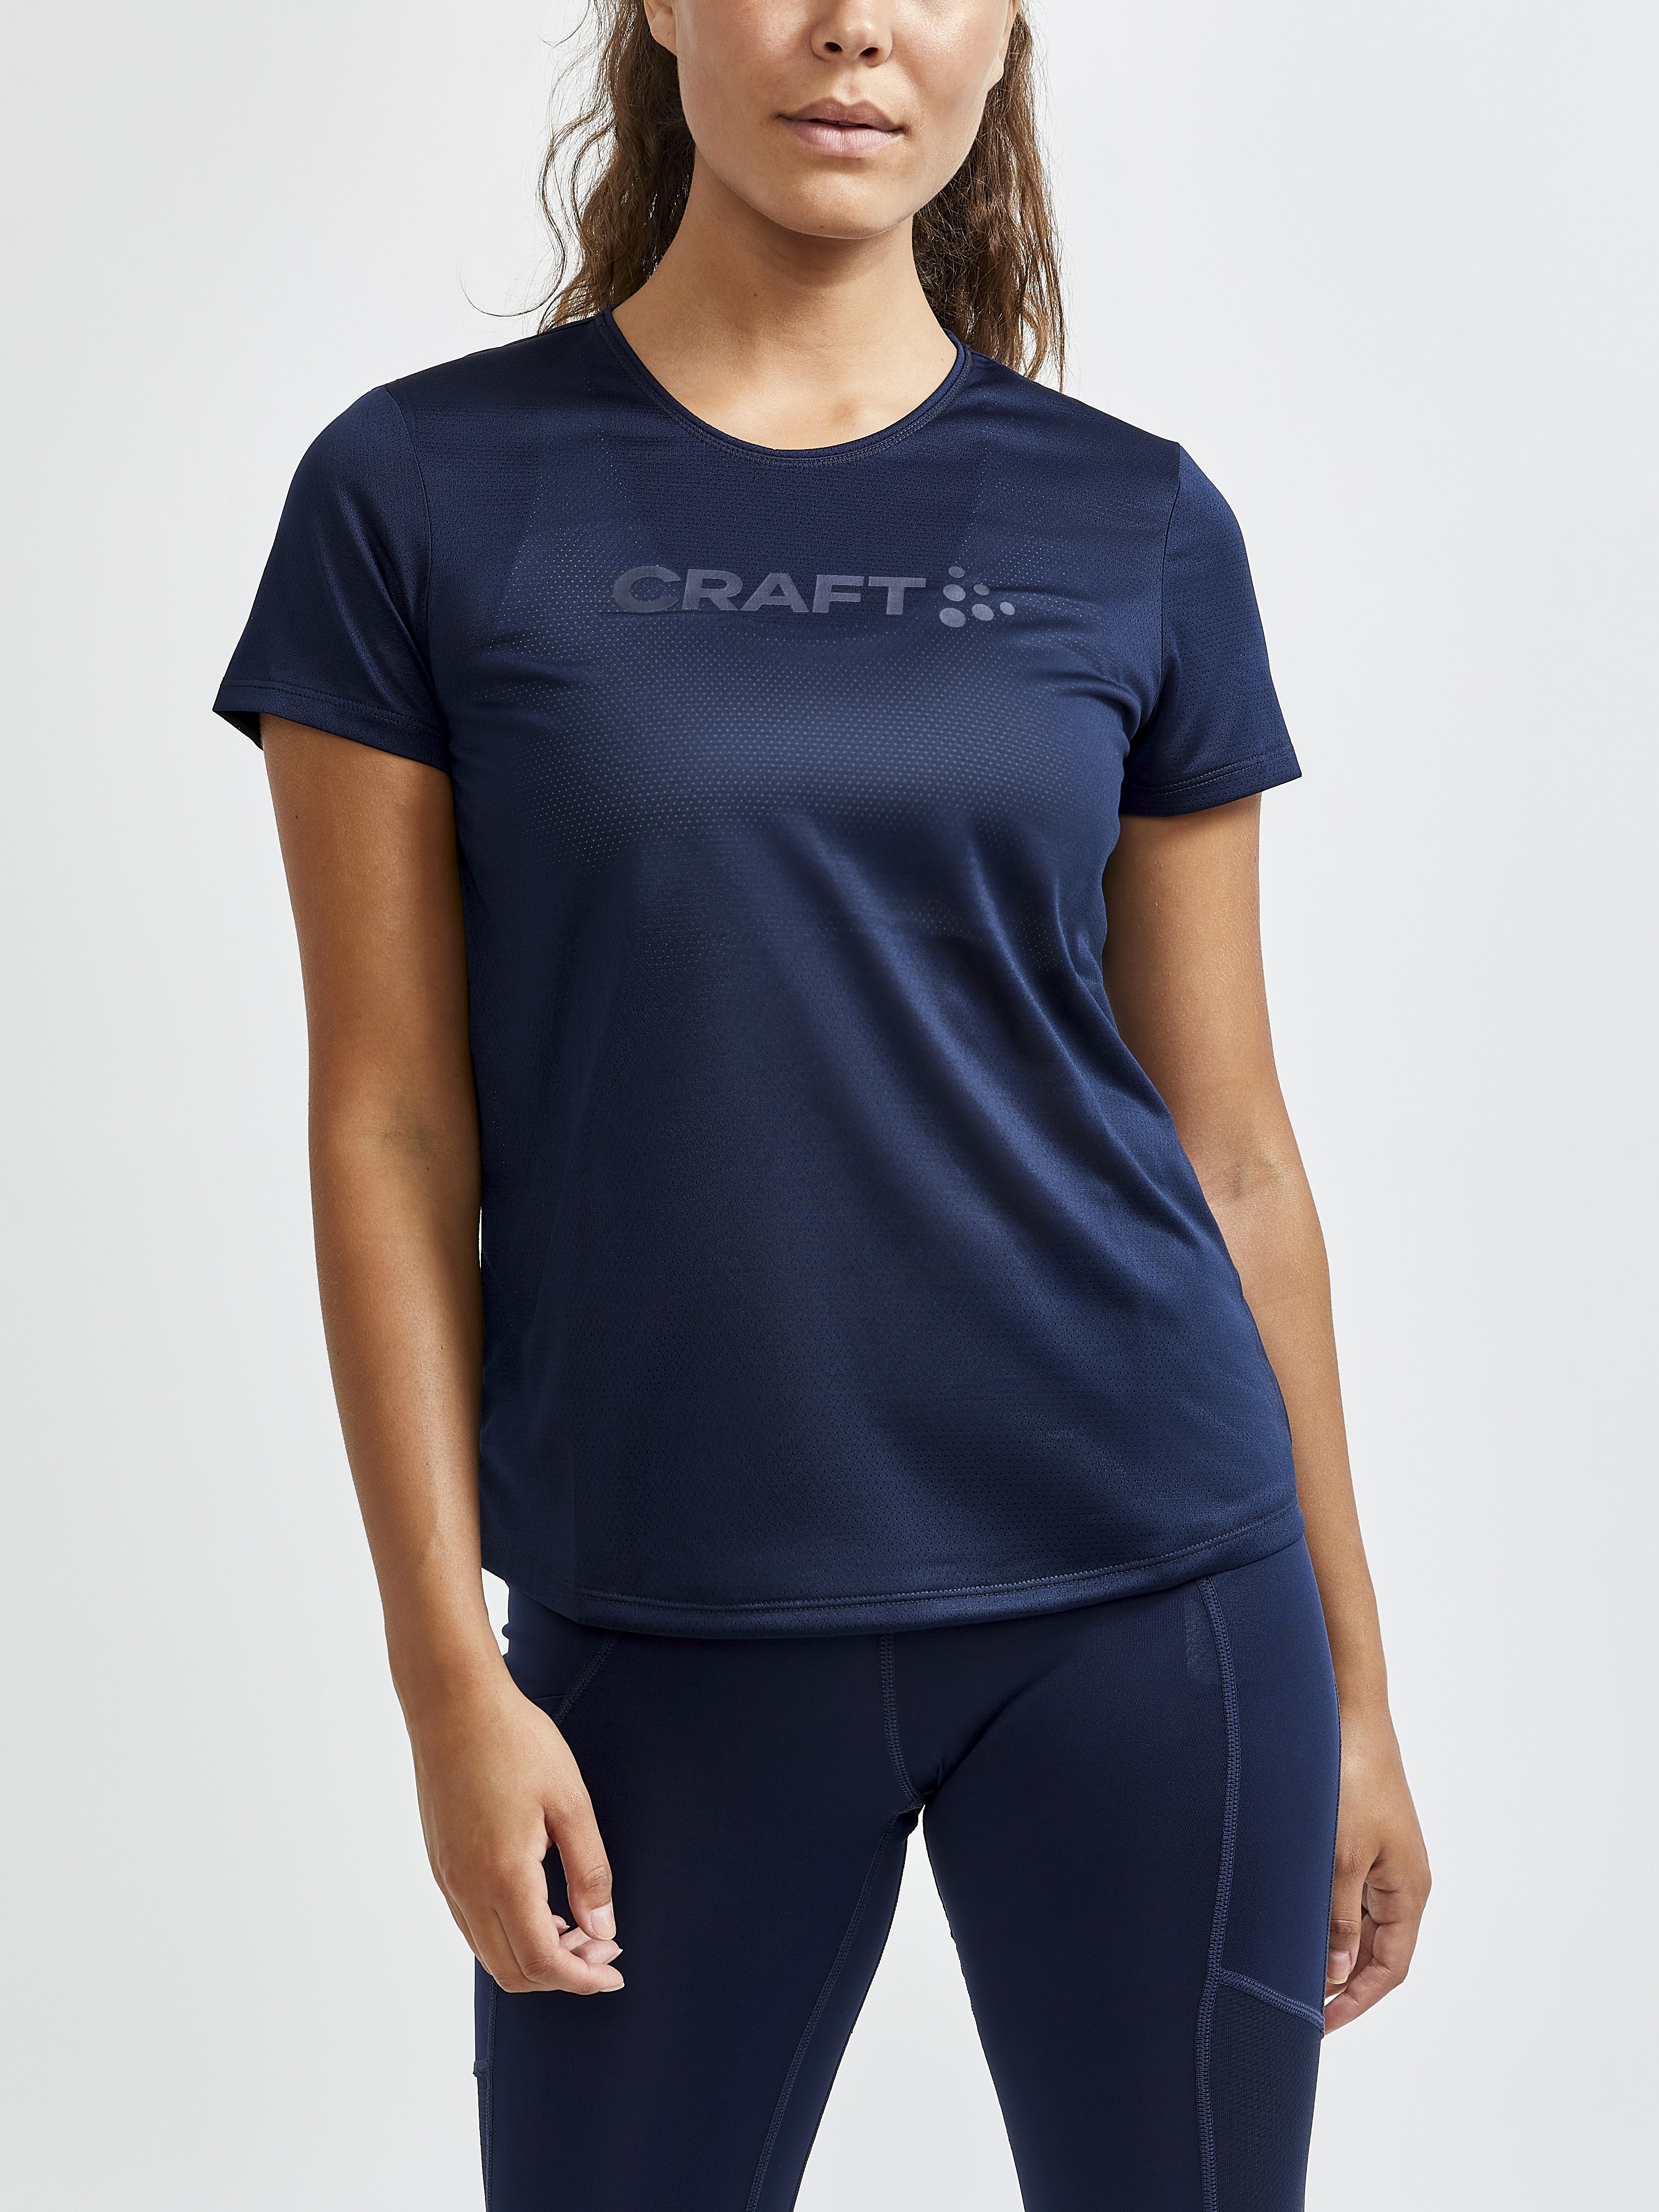 Shop Craft Canada Sportswear, Clothing and Accessories